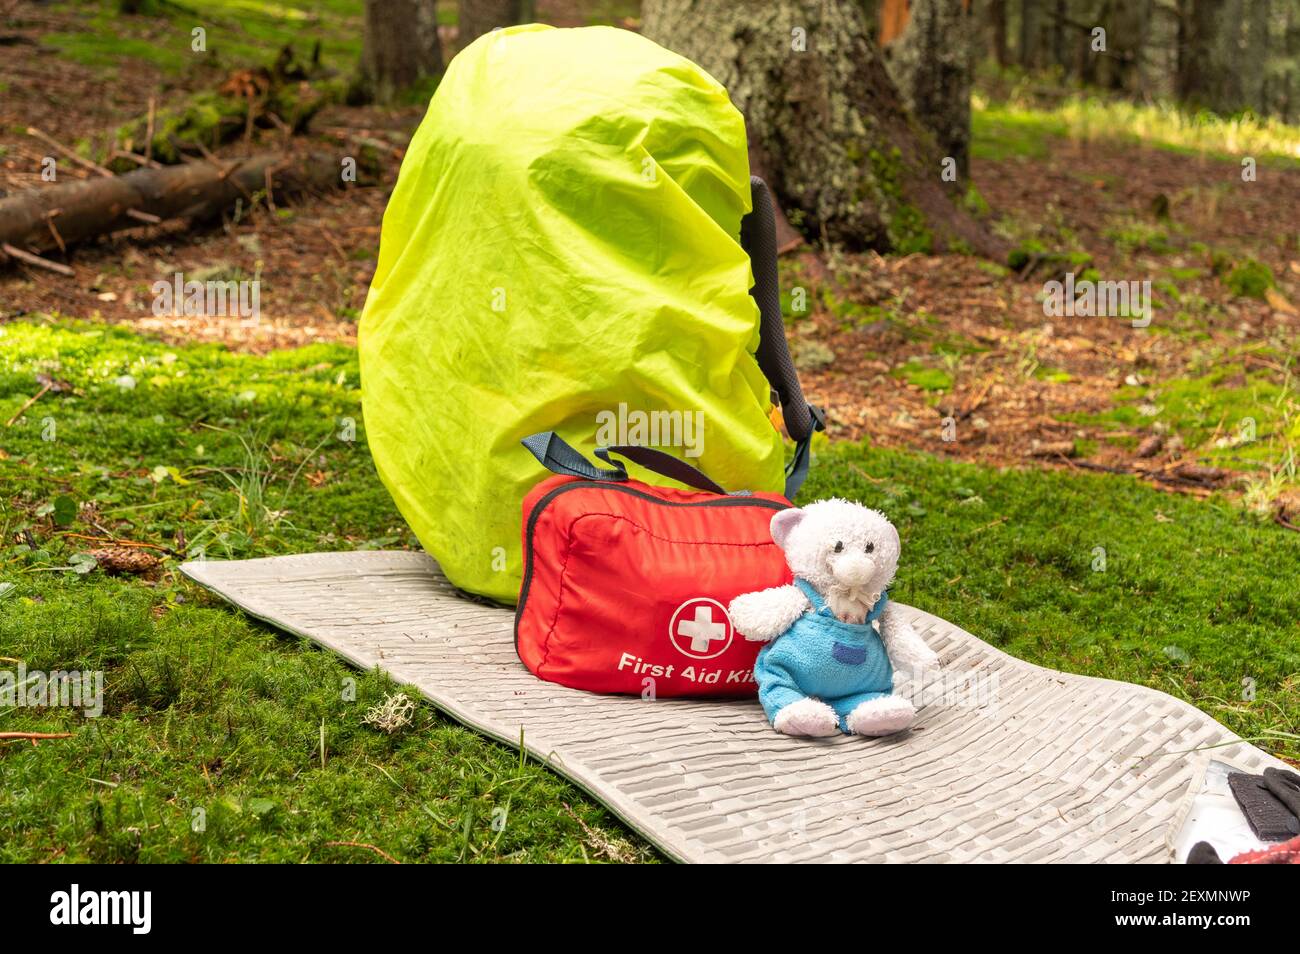 Children's equipment for tourism. Children's toy and backpack. First aid kit and backpack in the woods. Stock Photo